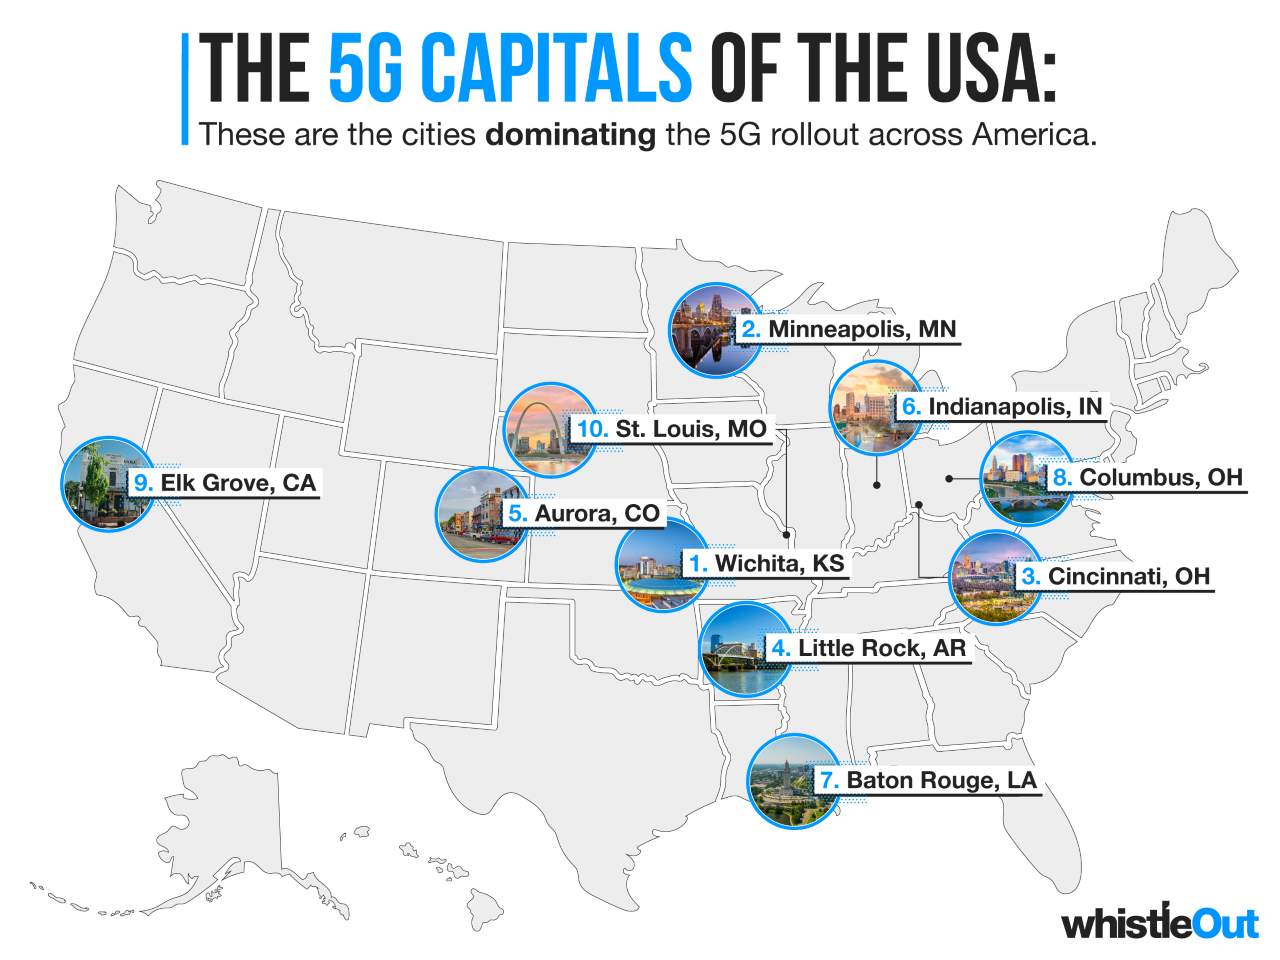 Map of cities dominating 5G